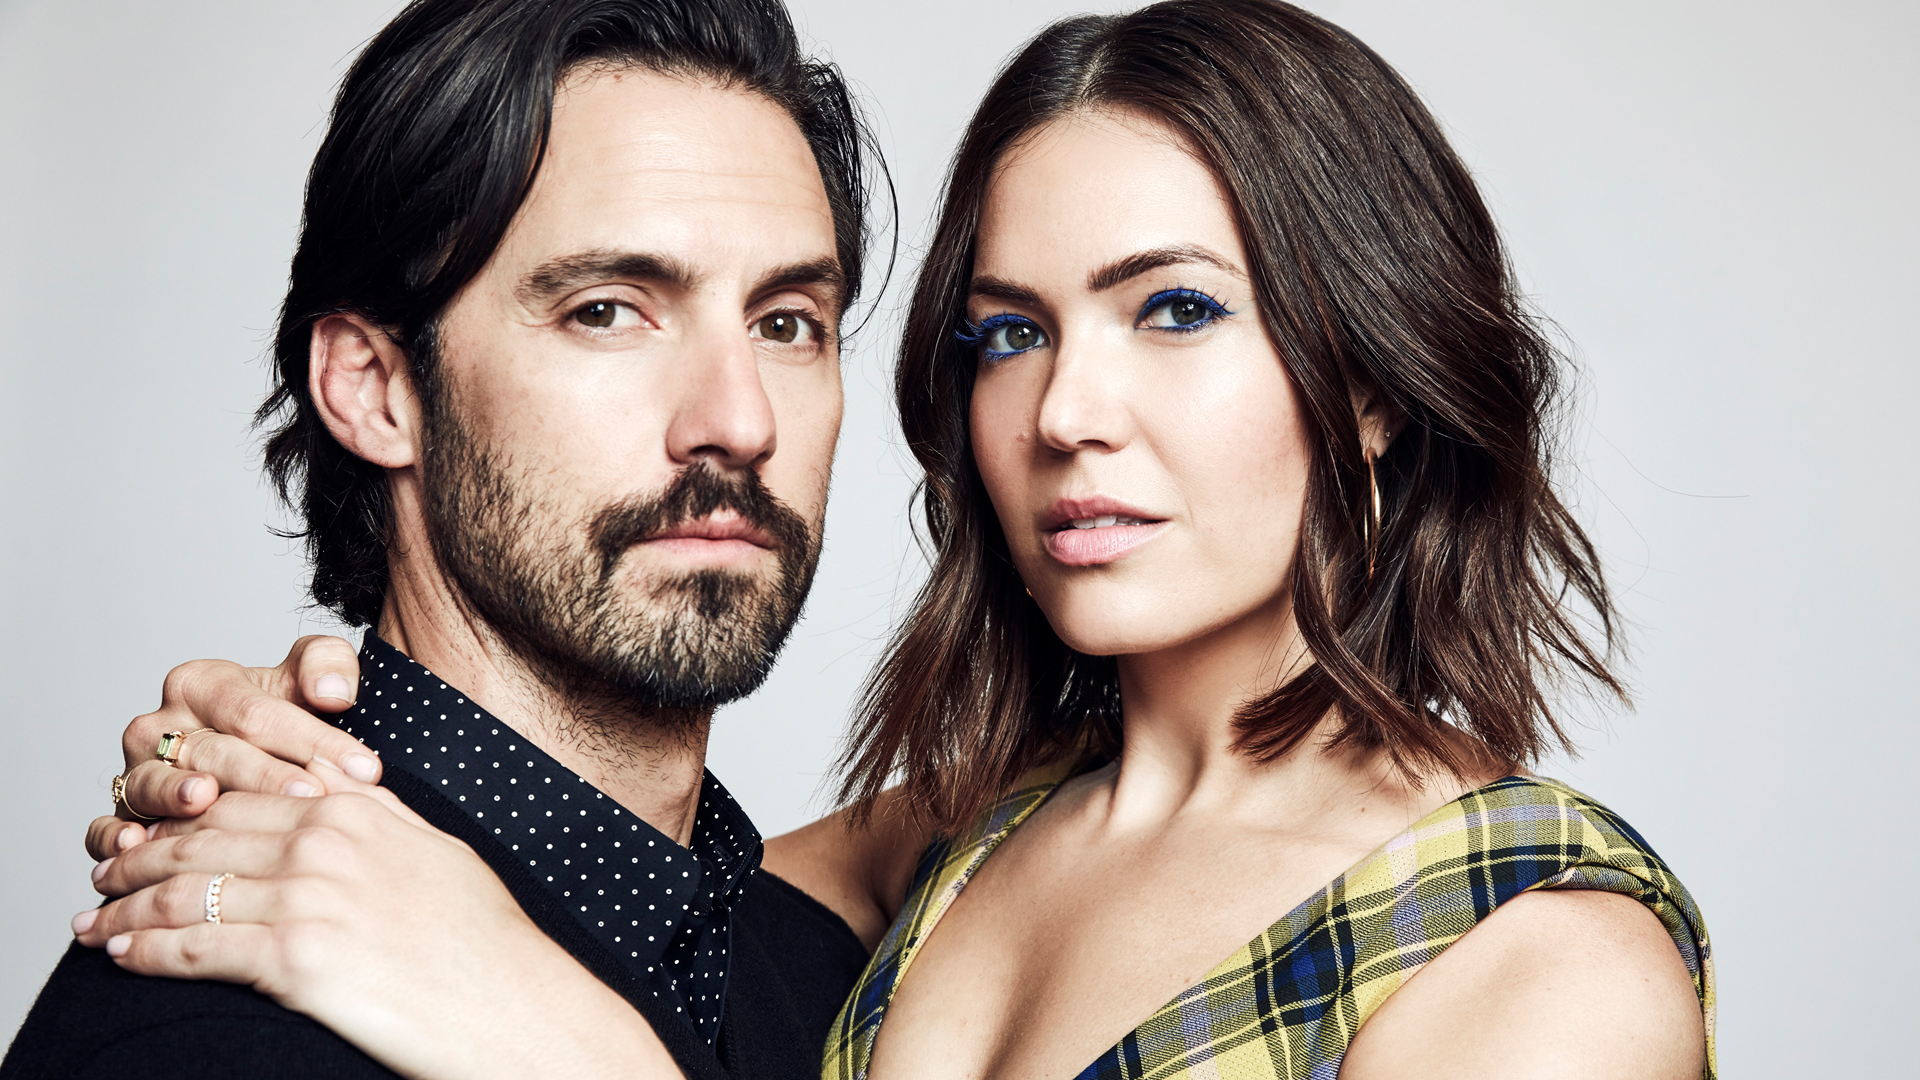 Headshots of Milo Ventimiglia (Jack Pearson) and Mandy Moore (Rebecca Pearson) from ‘This Is Us’ in 2019